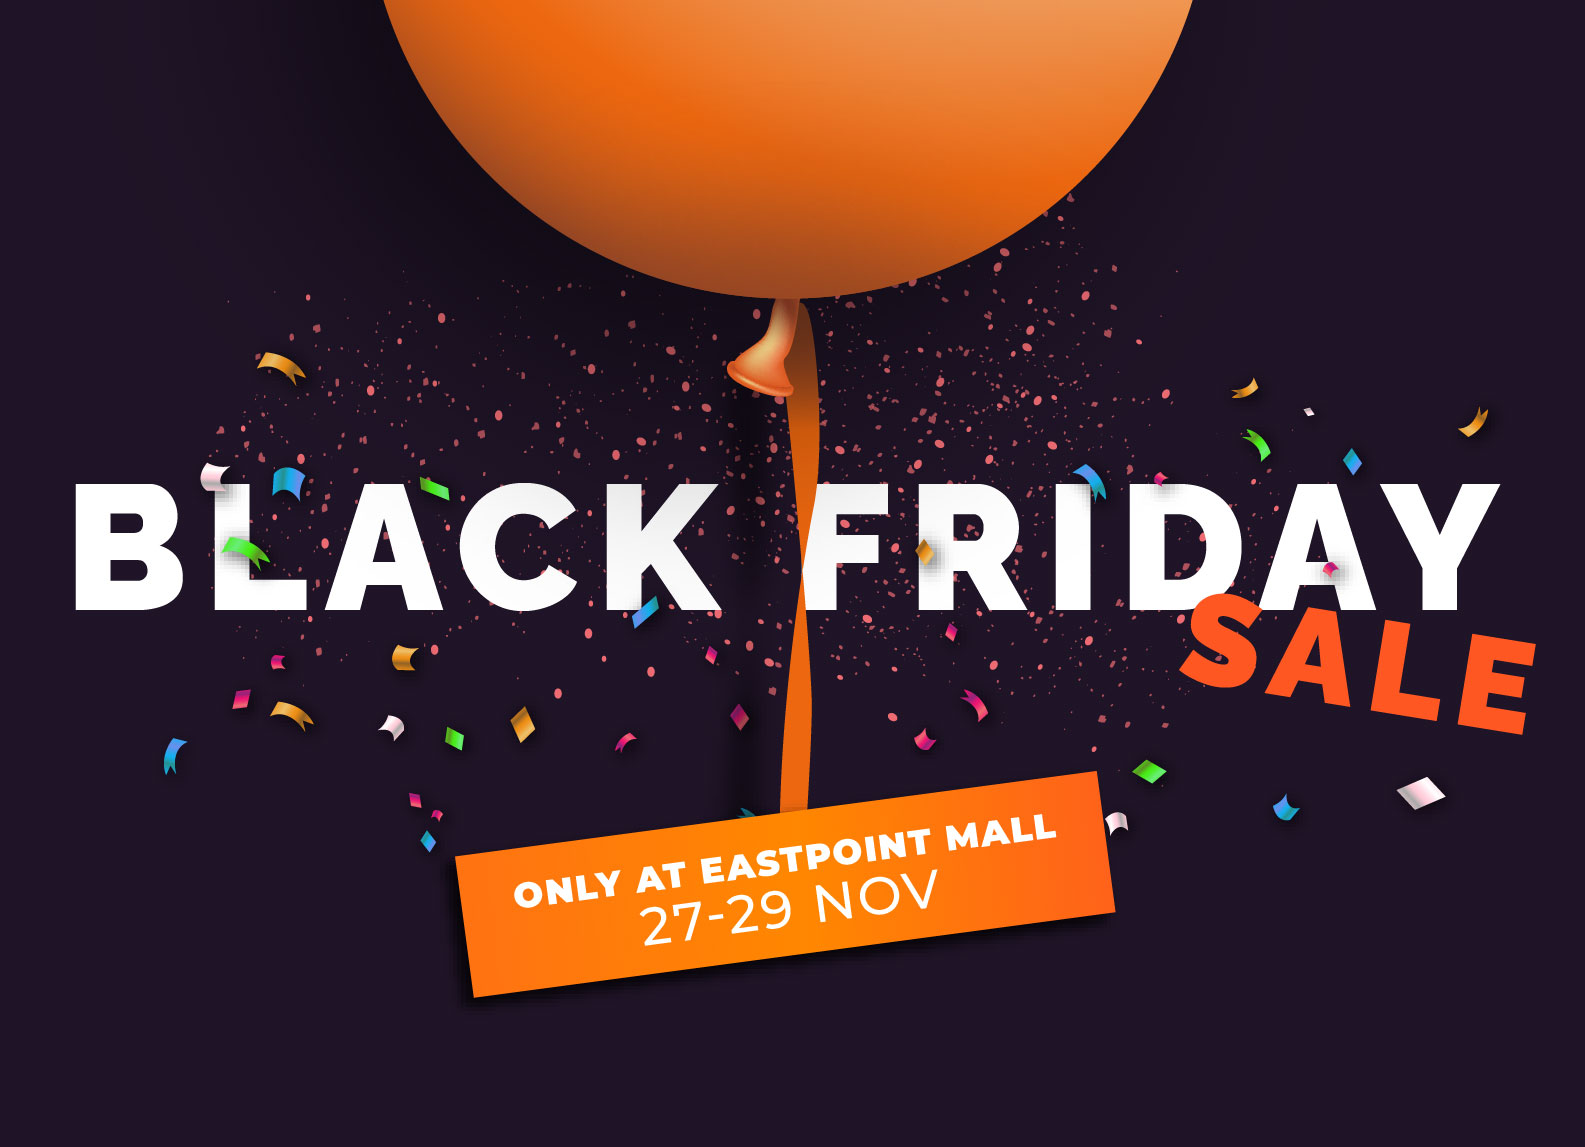 3 Days Black Friday Sale at Eastpoint Mall